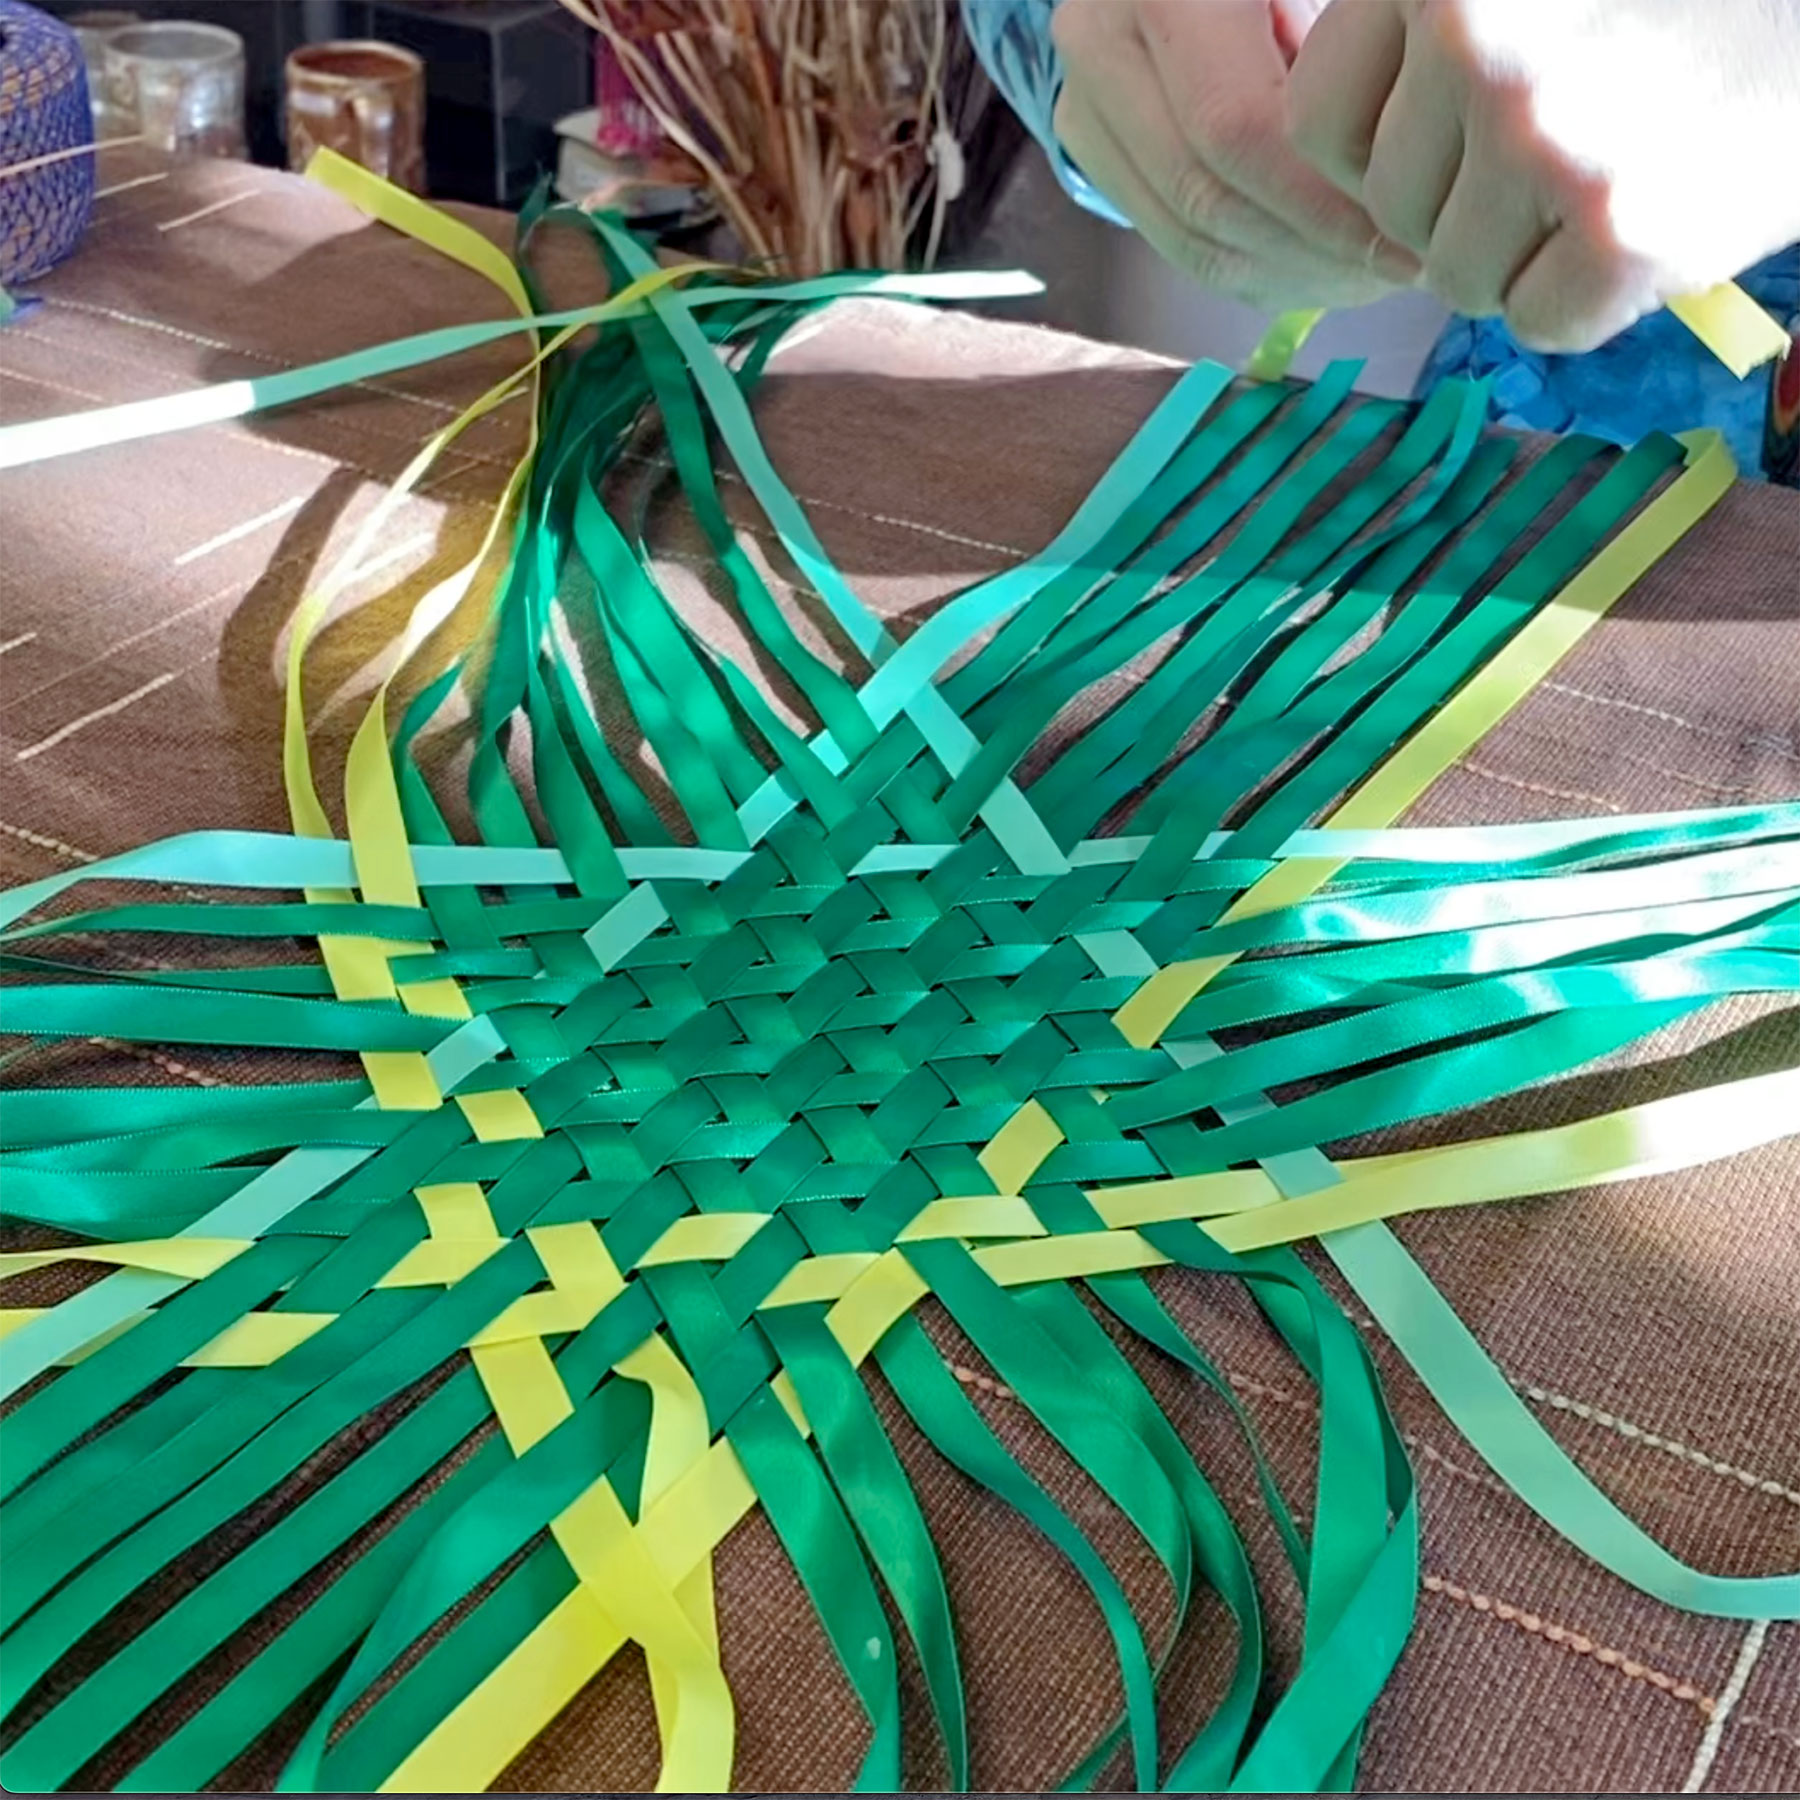 Triaxial Weaving Demo by Peggy Thrasher